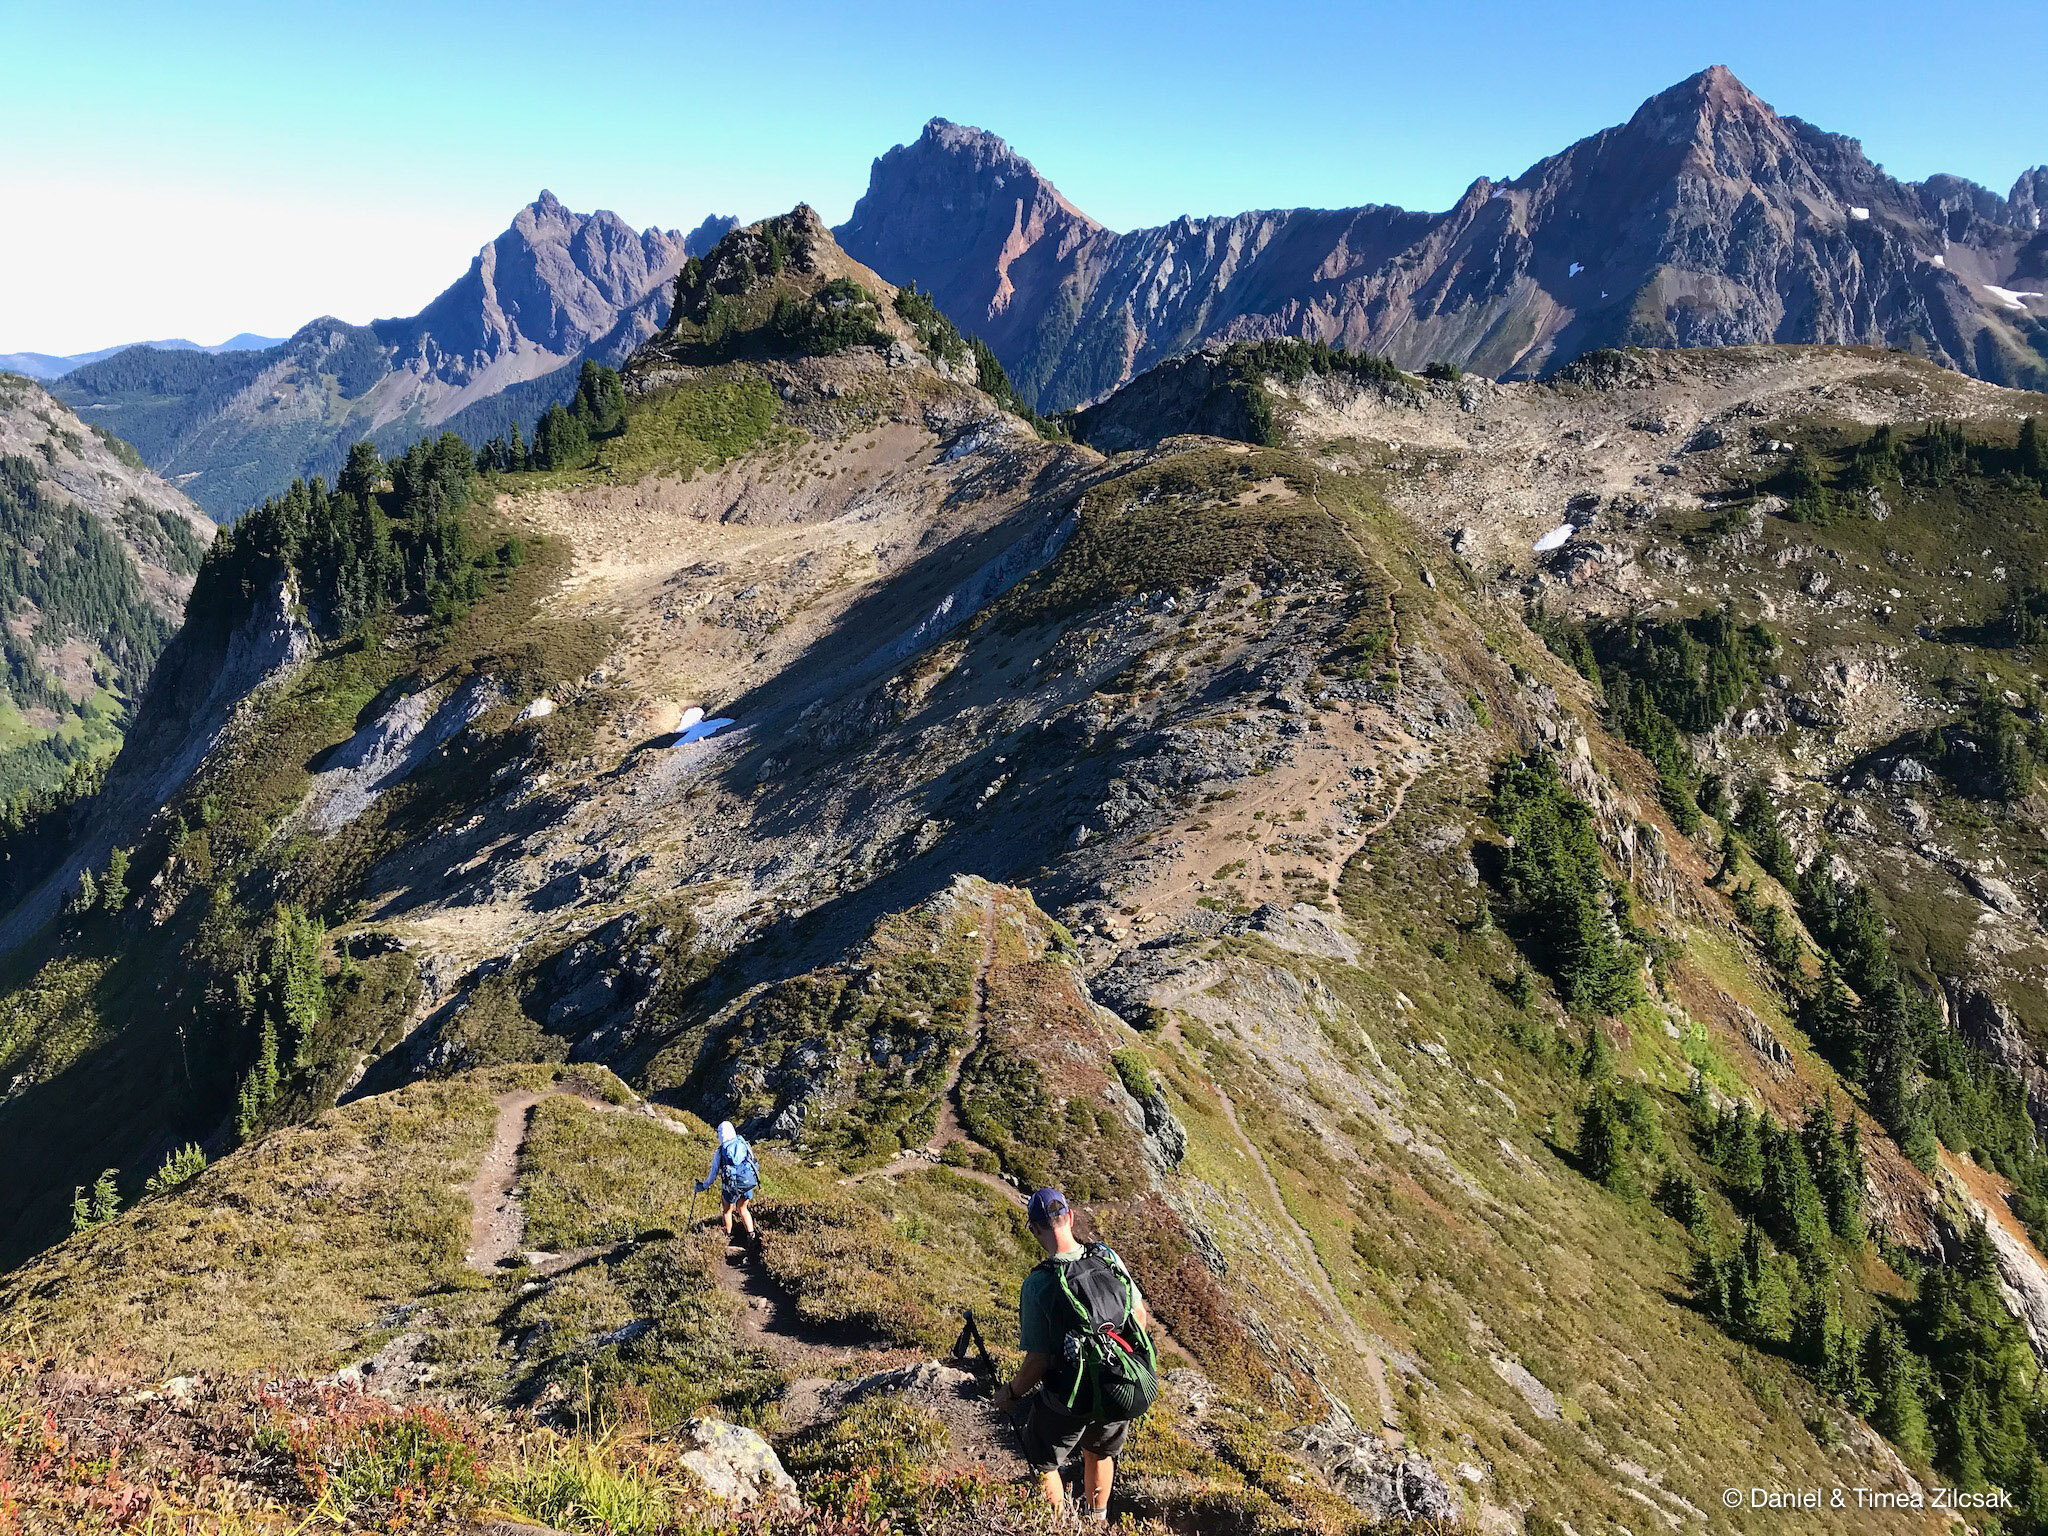 Trail towards the summit of Yellow Aster Butte with Mount Larrabee and American Border Peak in the background